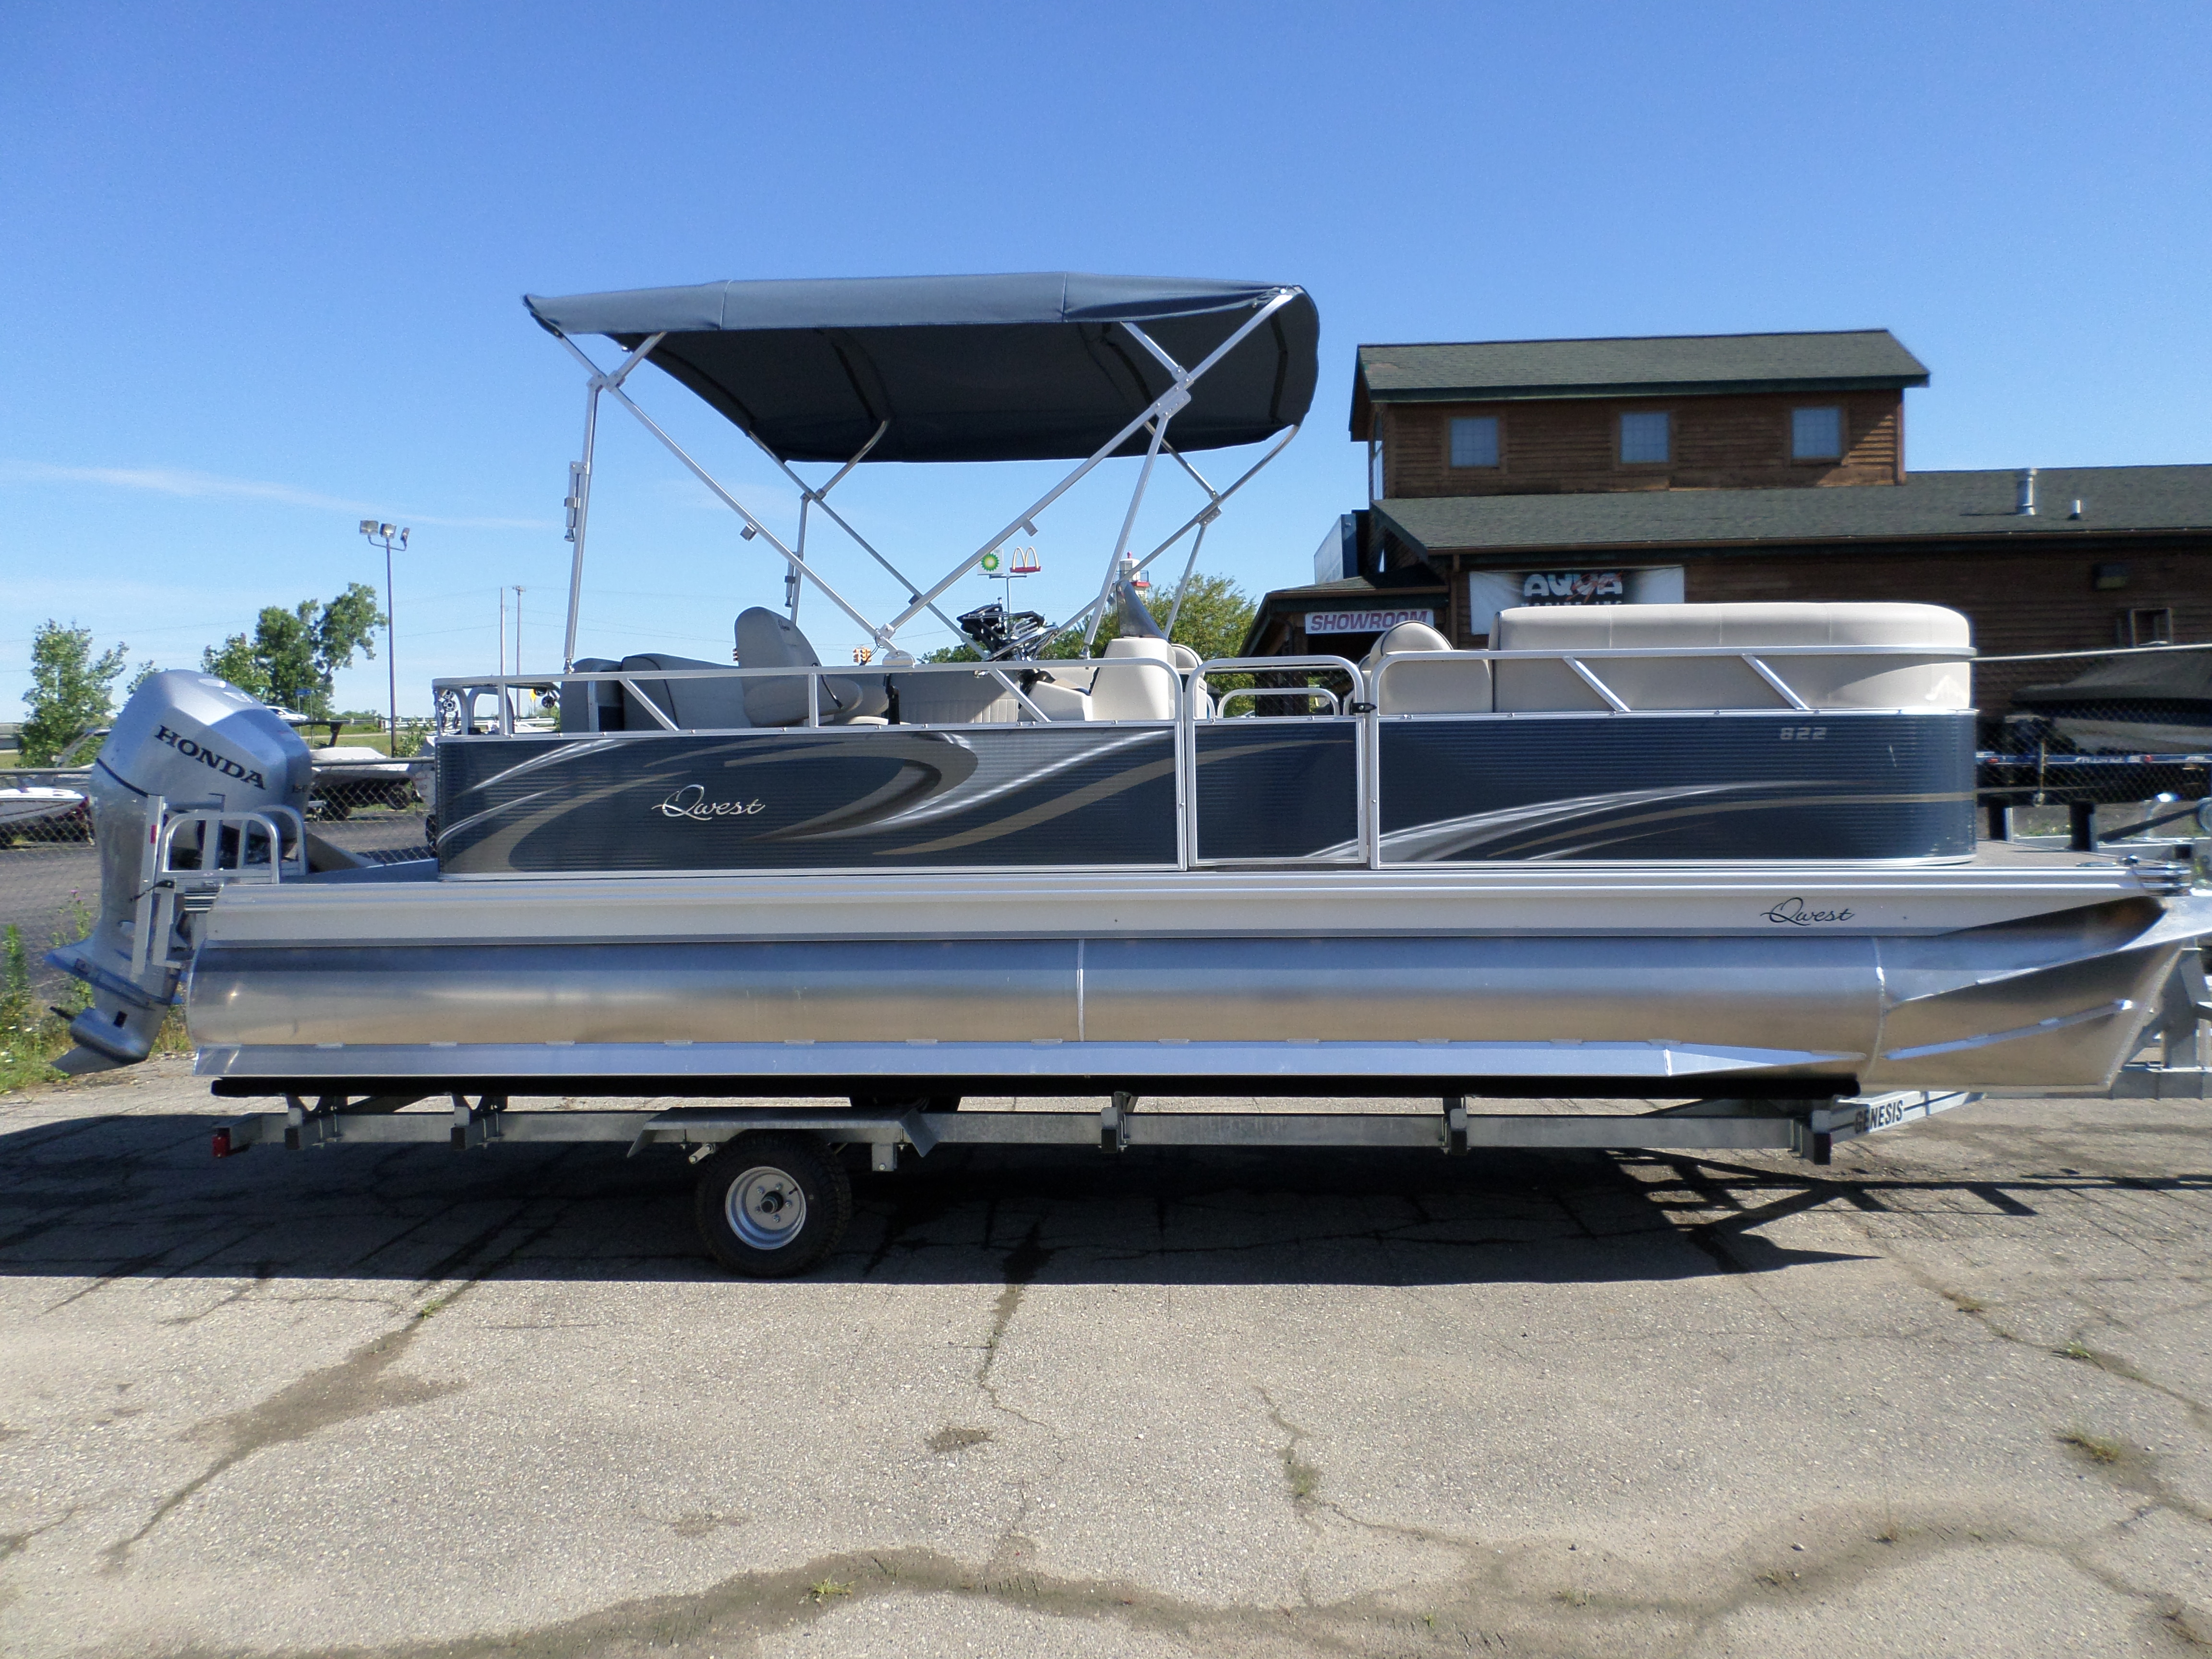 angler qwest 822 fish n cruise fishing pontoon boat by